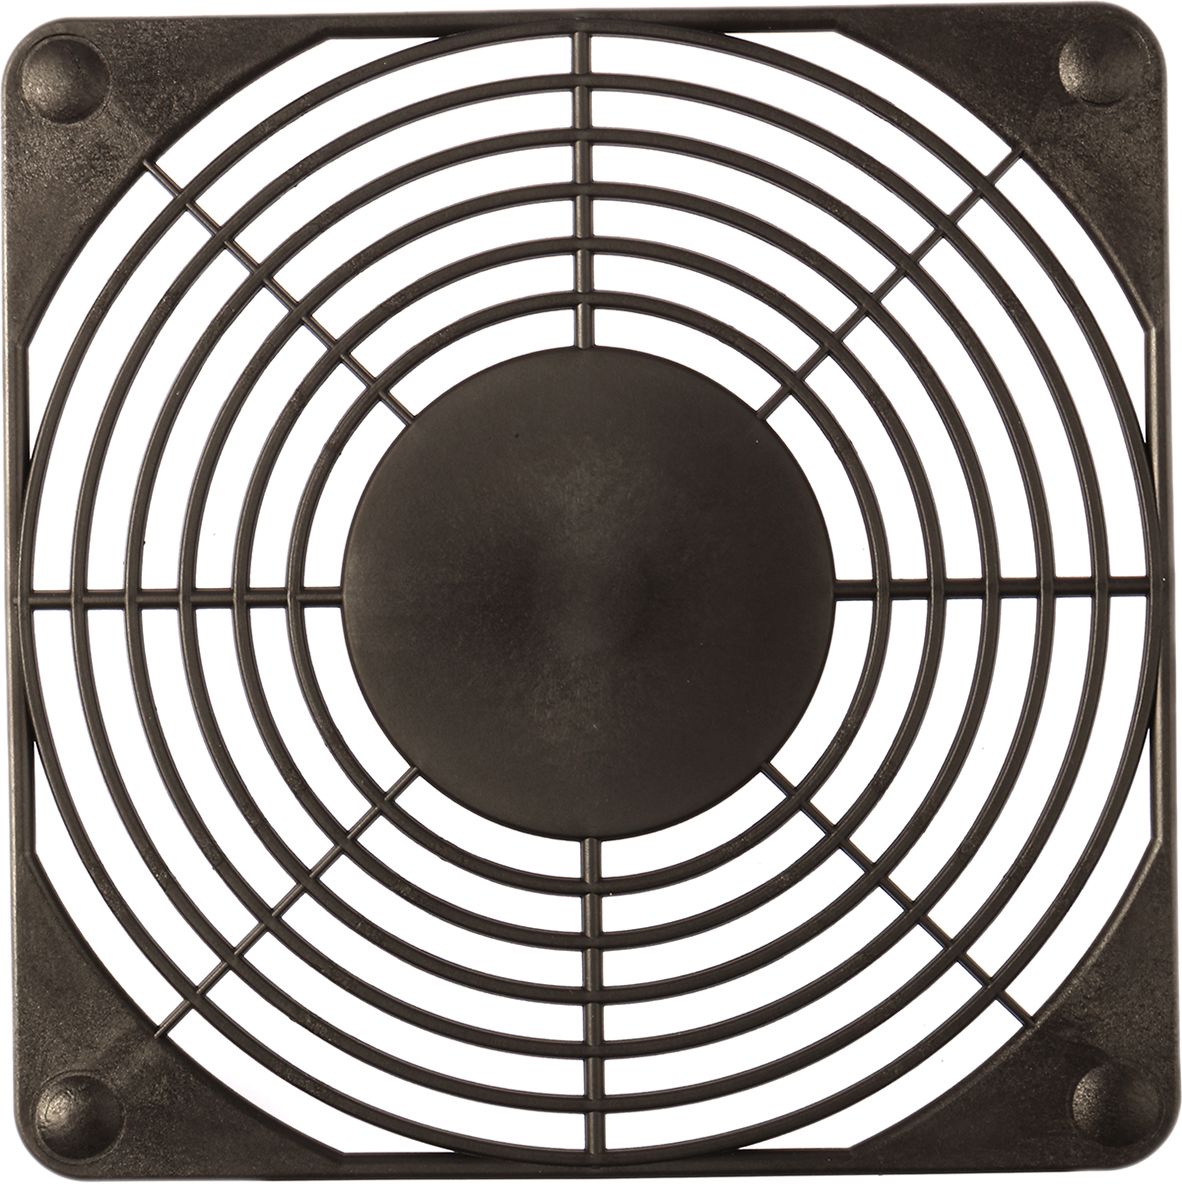 ebm-papst Plastic Finger Guard for 119 x 119mm Fans, 119 x 119mm, 105mm Hole Spacing